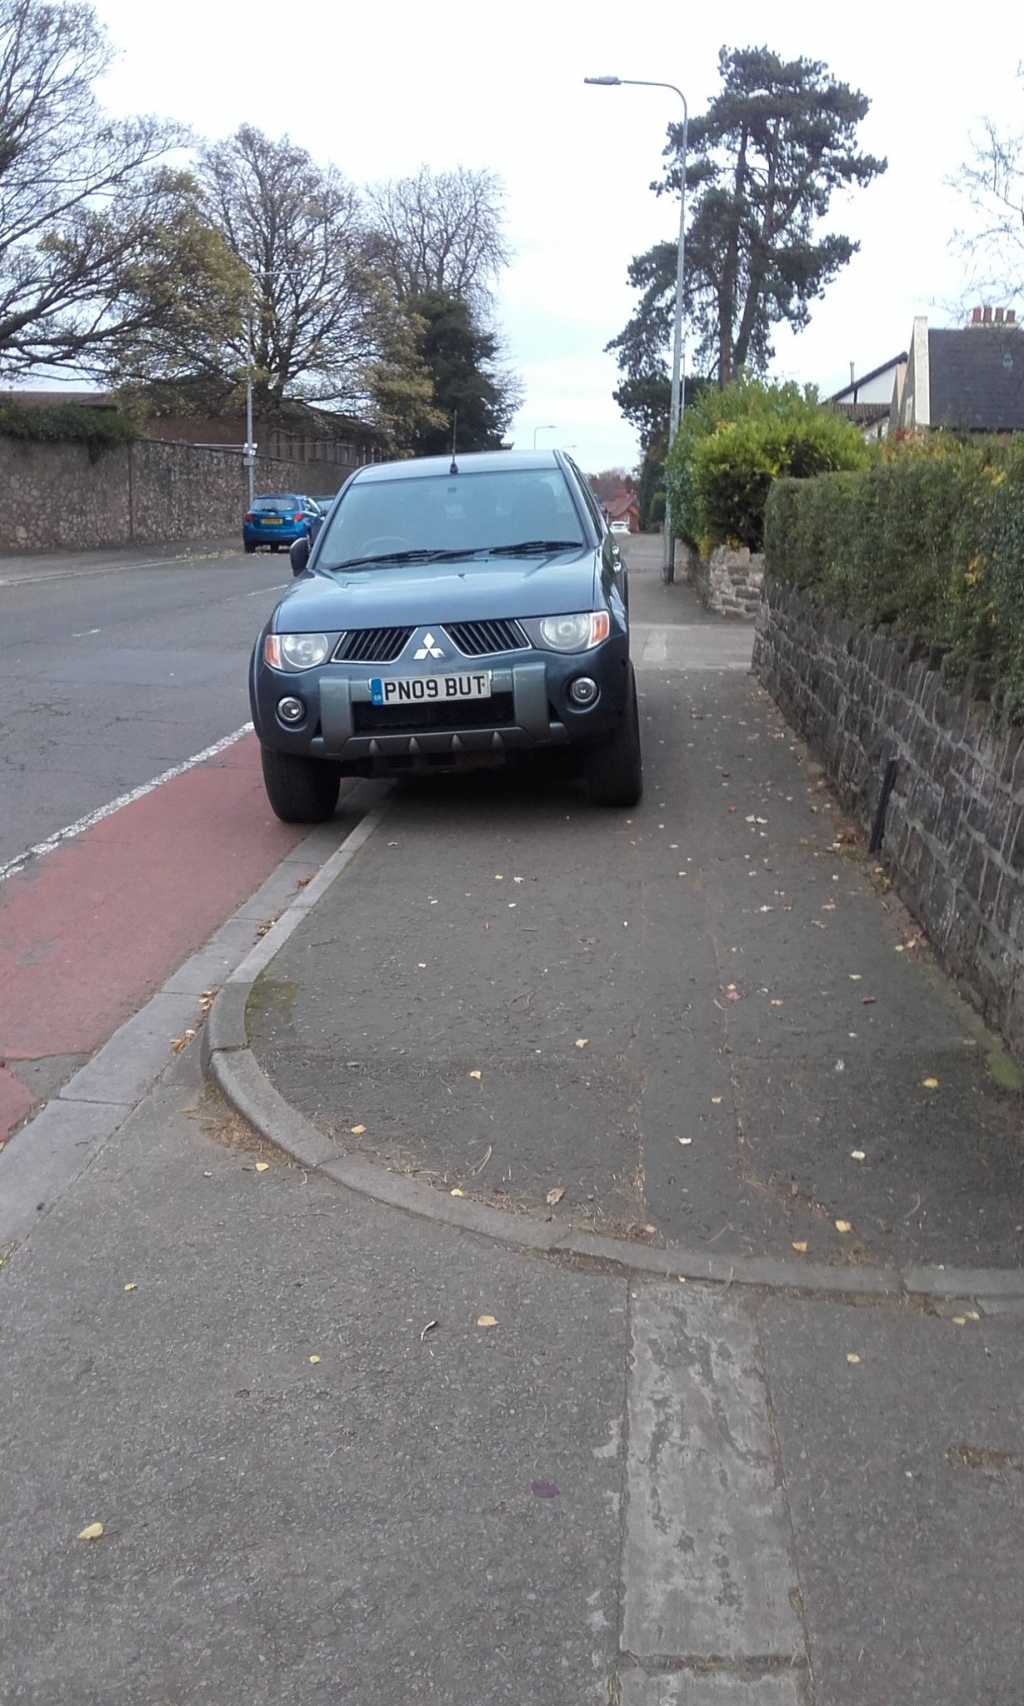 PN09 BUT displaying Inconsiderate Parking